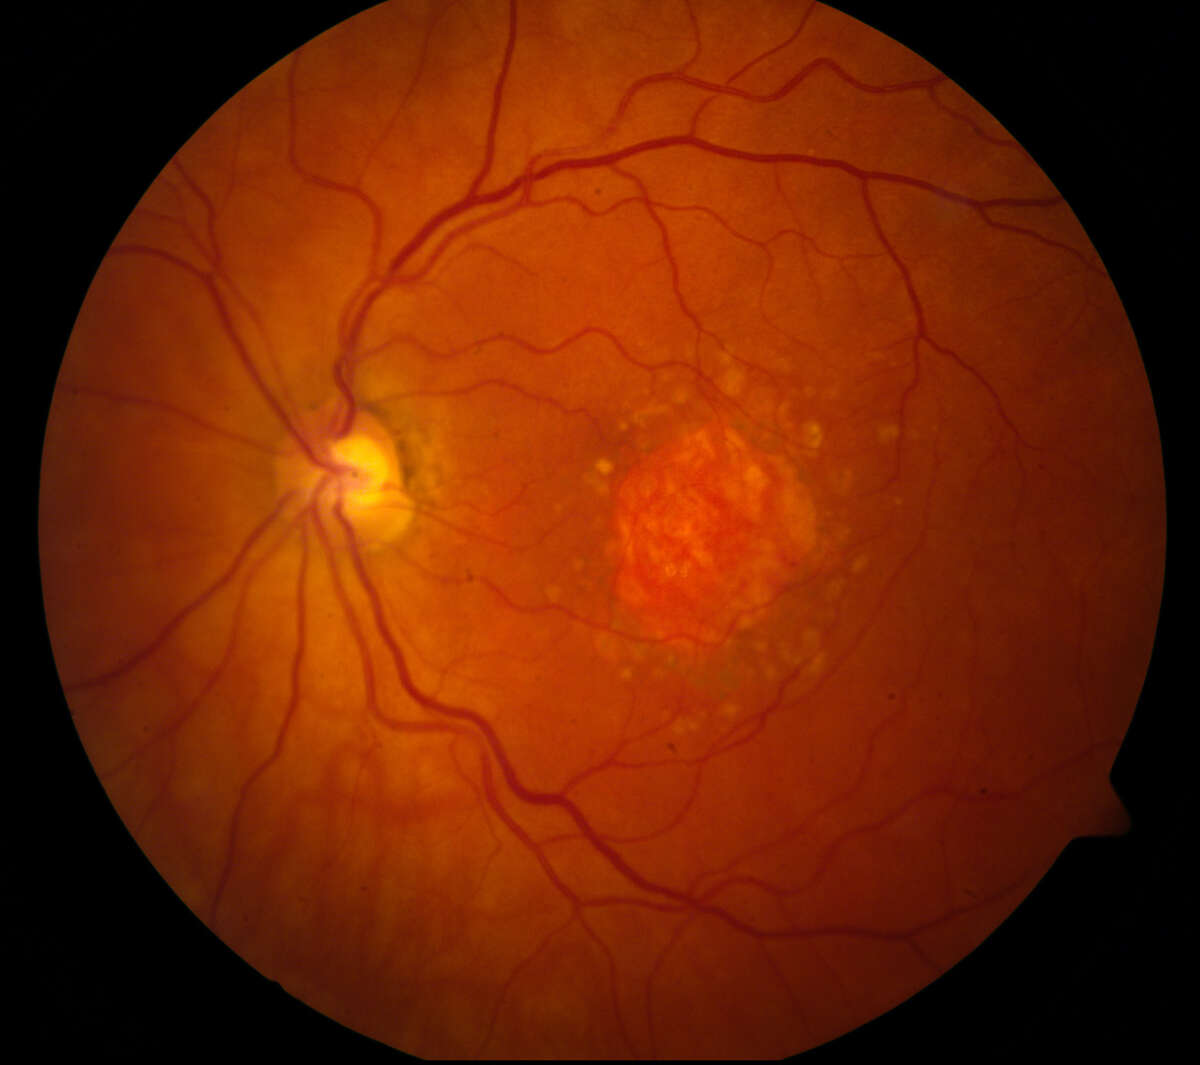 This image ﻿shows a microscopic image of a retina being damaged by the so-called "dry" form of age-related macular degeneration. ﻿